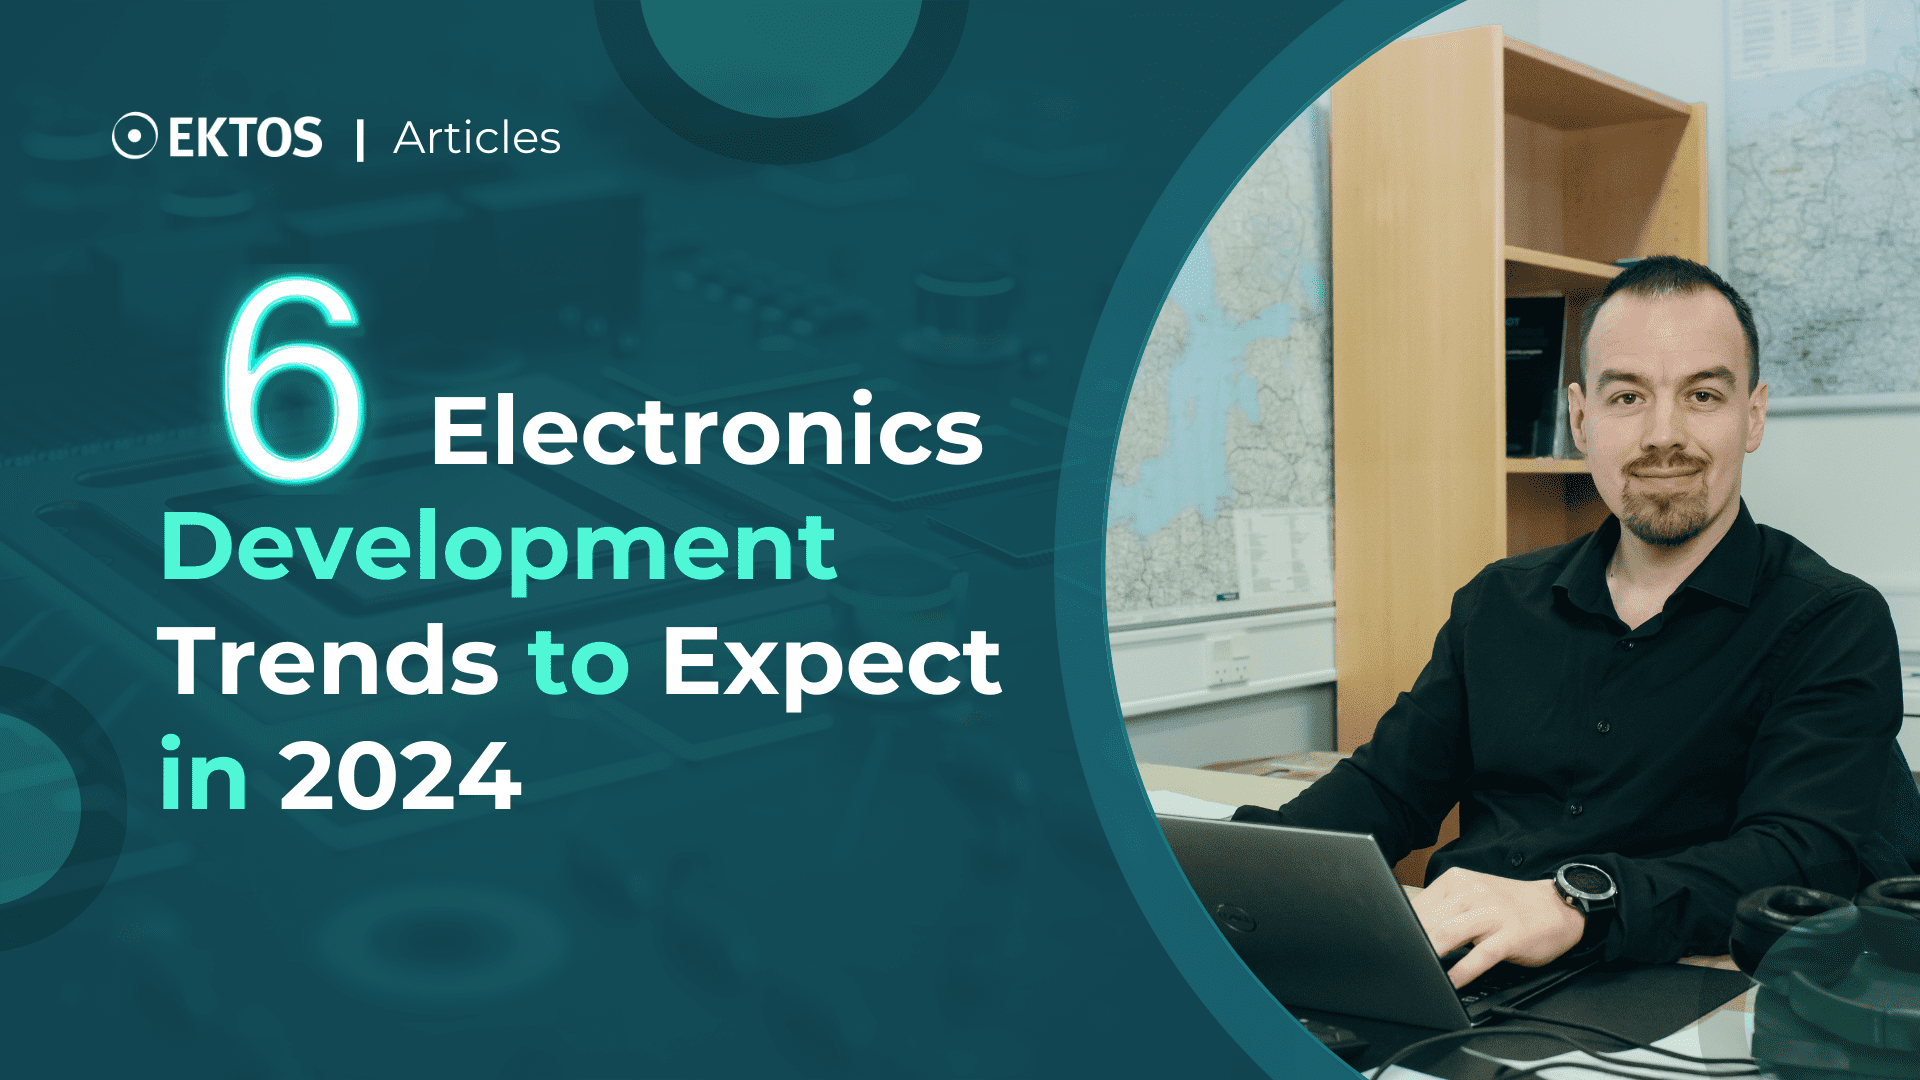 6 Electronic Development Trends to Expect in 2024